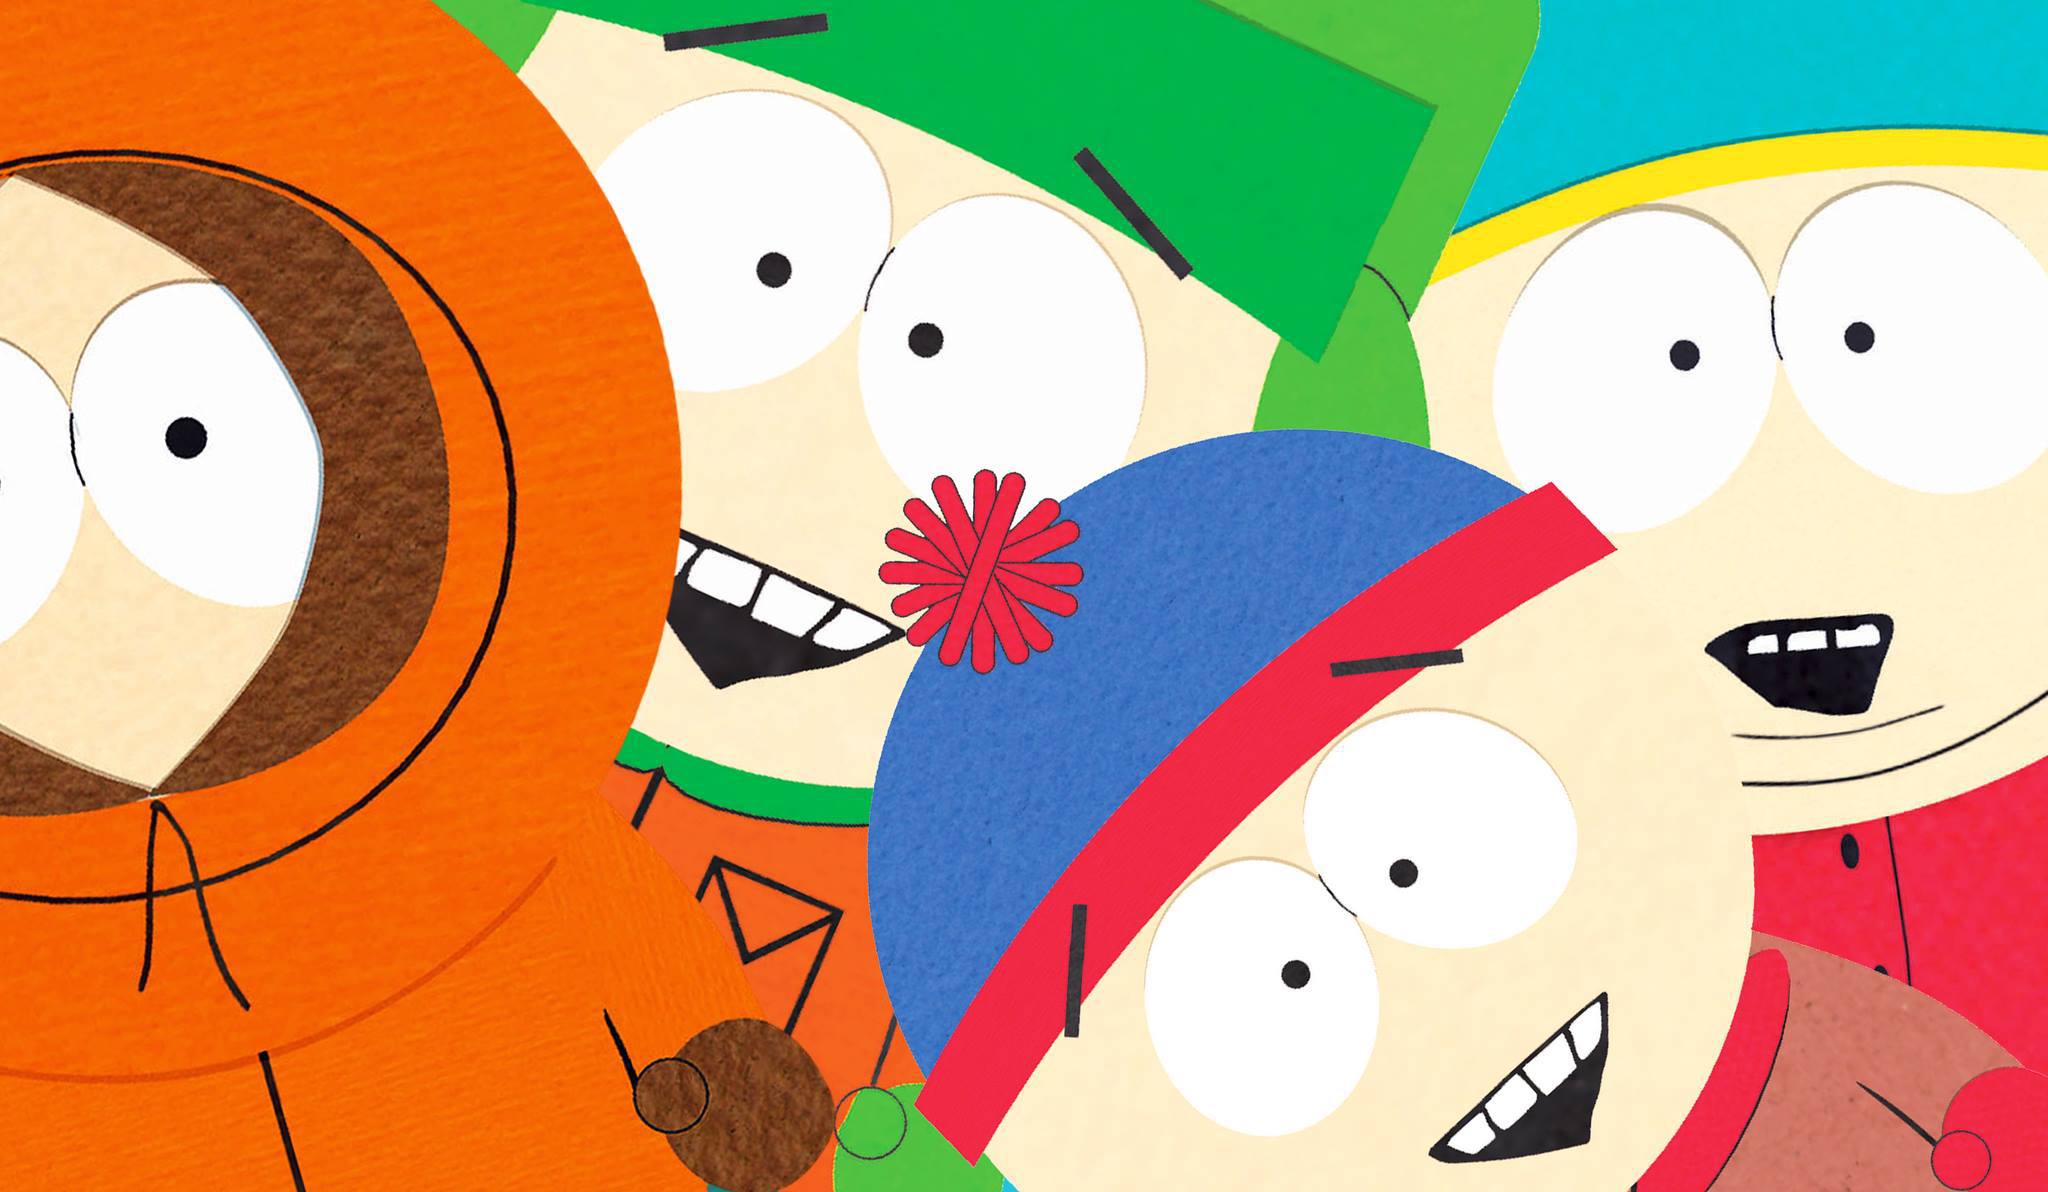 South Park Wallpapers - Wallpaper Cave